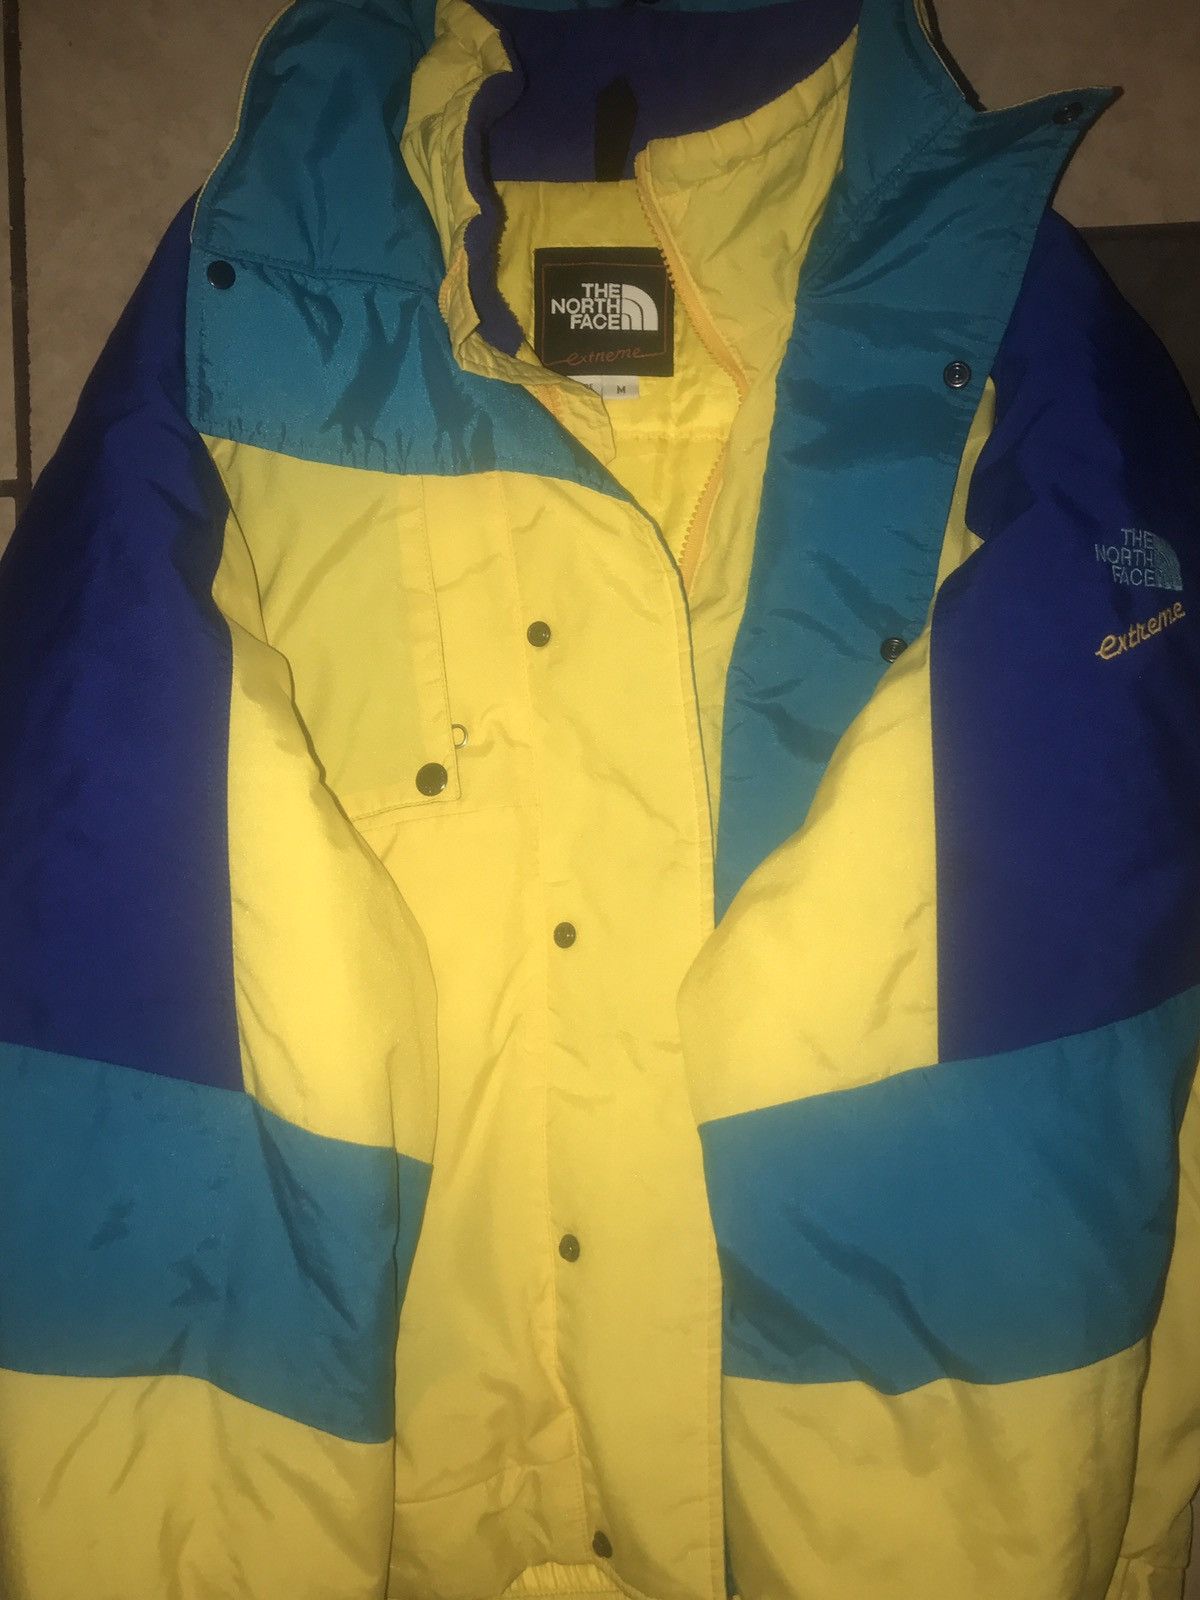 The North Face Vintage the north face extreme jacket Size US M / EU 48-50 / 2 - 4 Preview